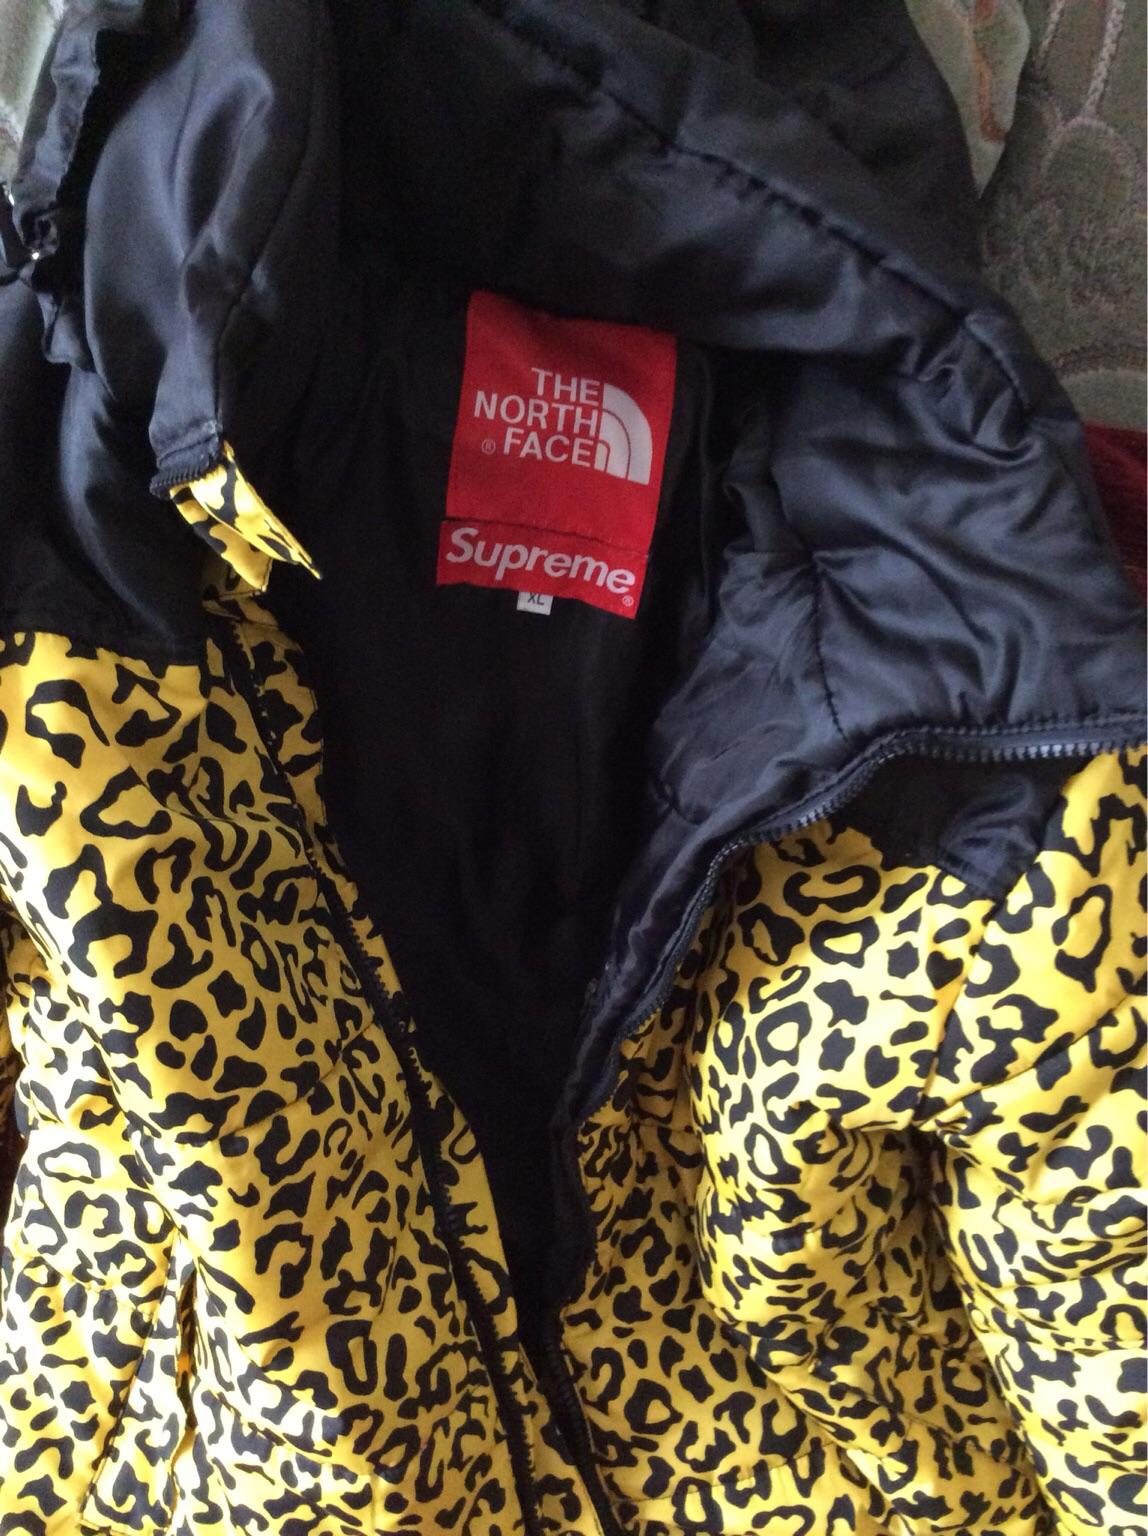 The North Face Supreme Leopard Print Jacket In LL55 Caernarfon For